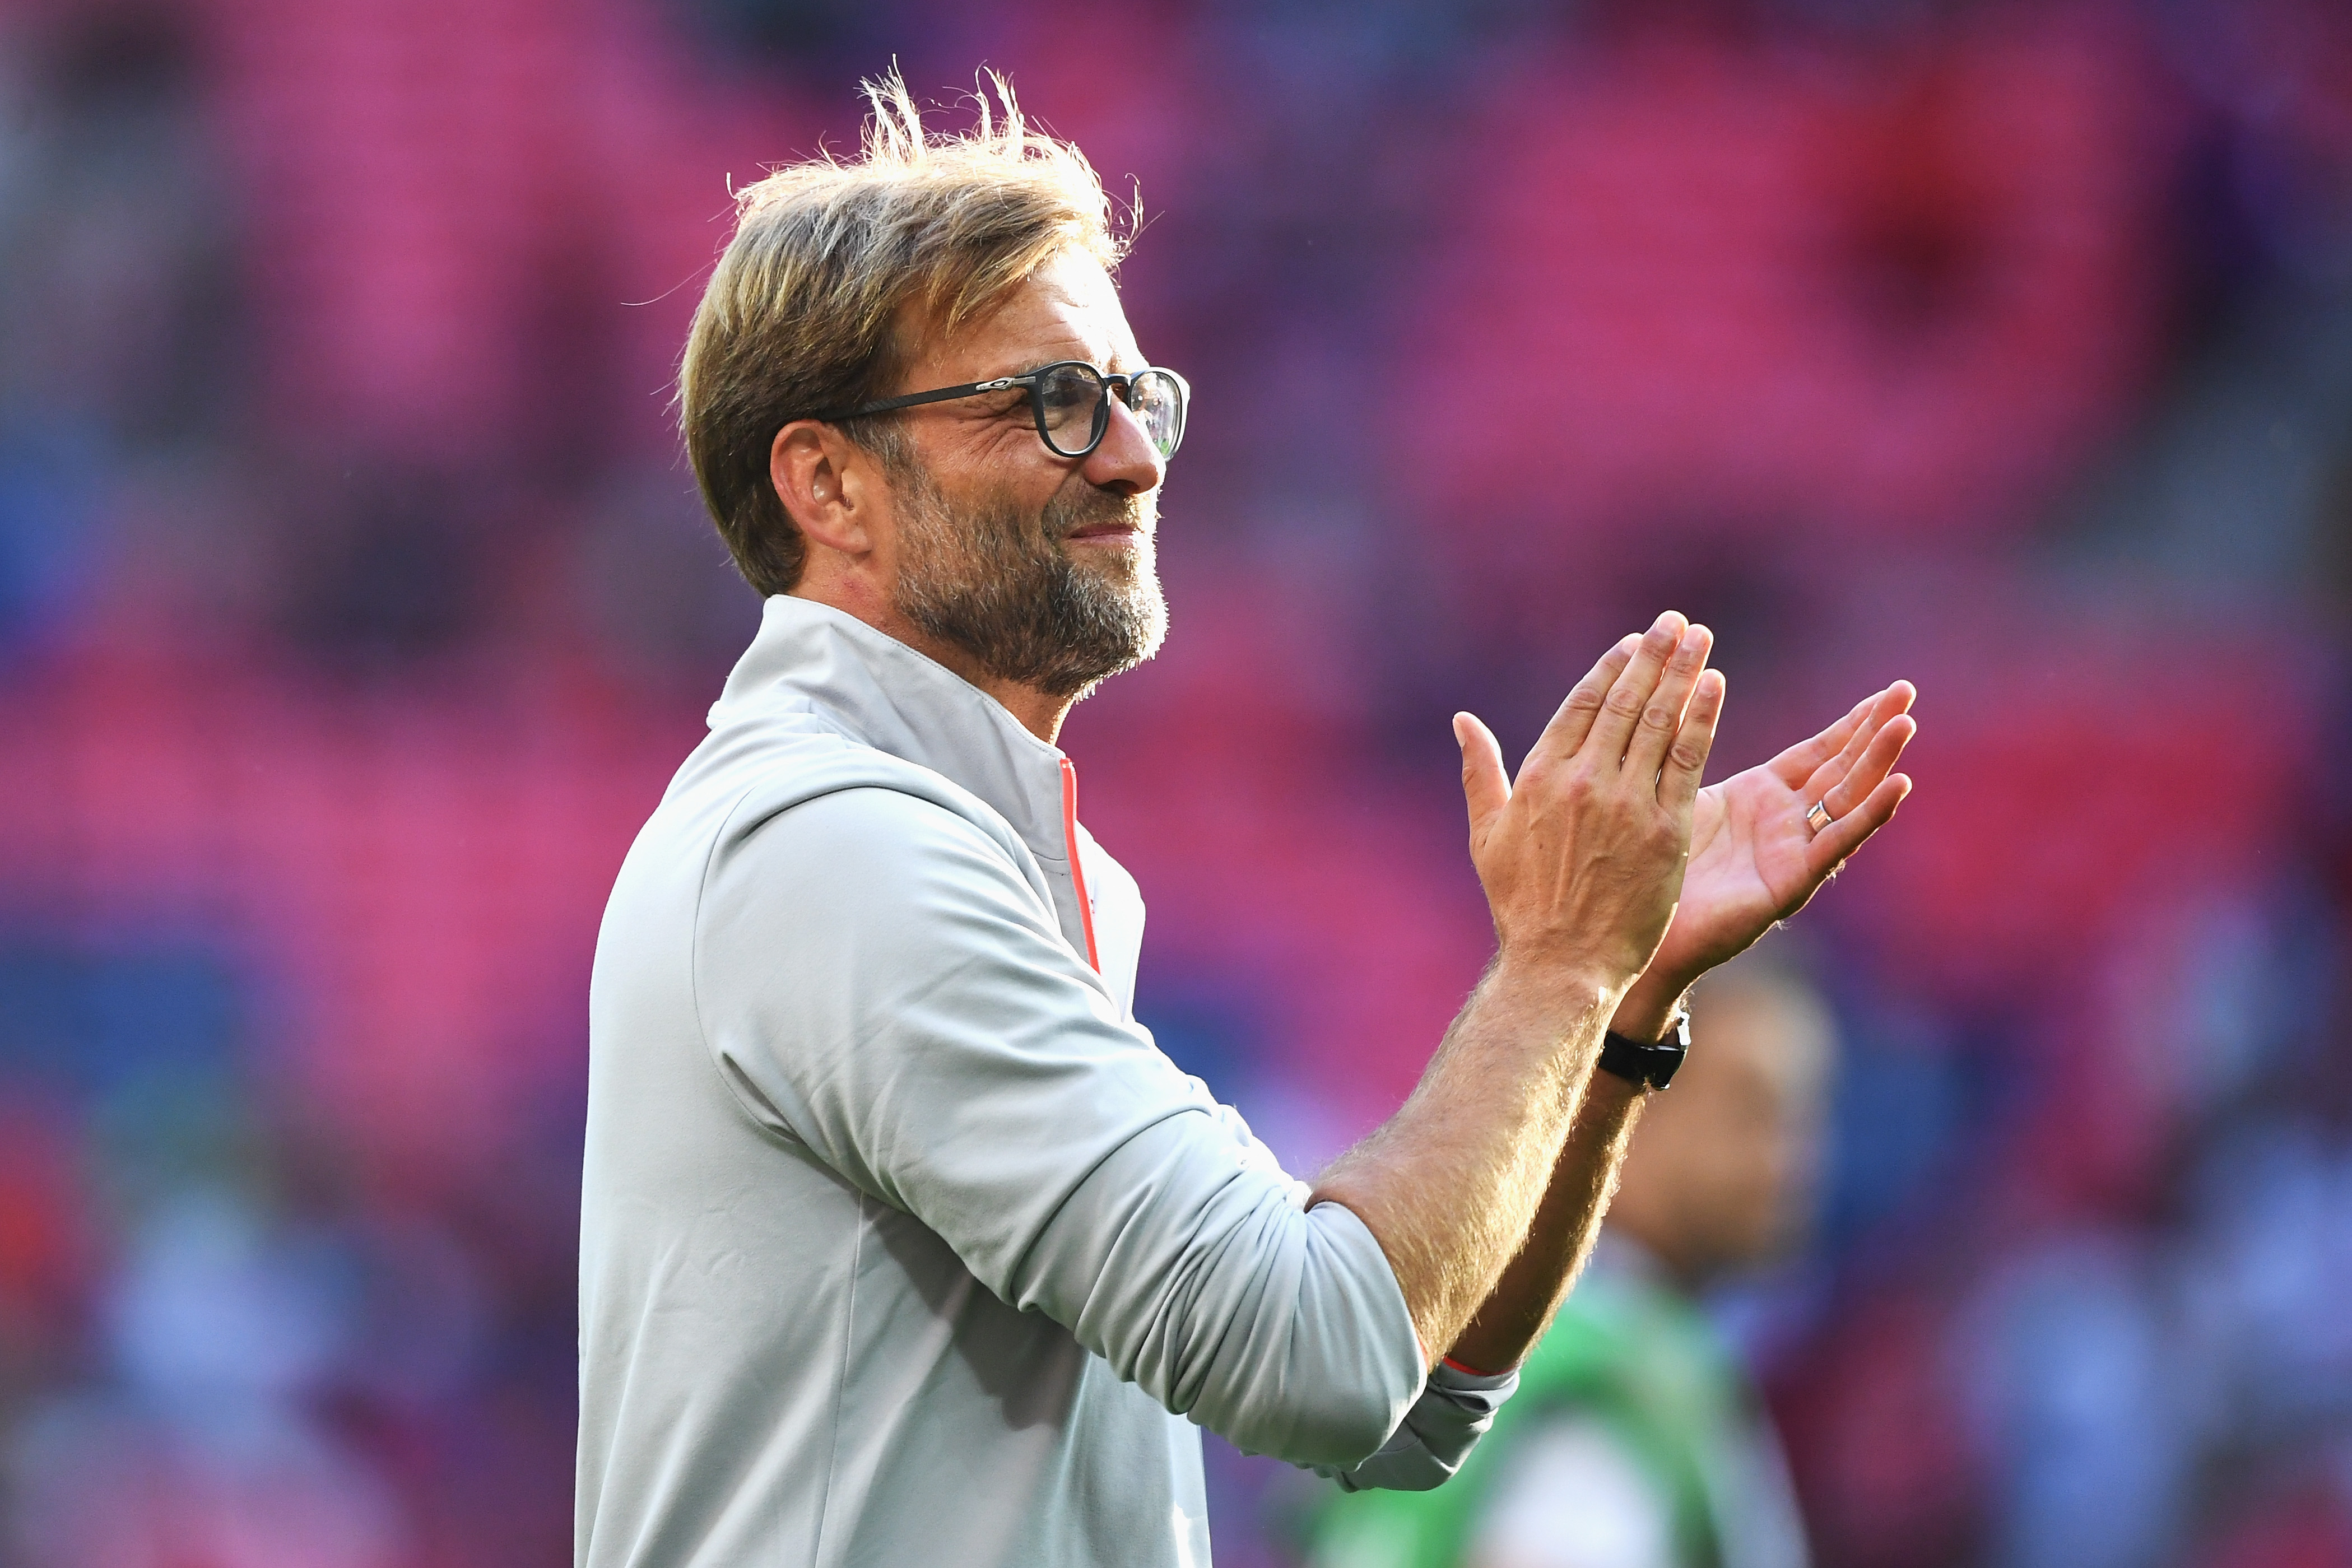 LONDON, ENGLAND - AUGUST 06:  Jurgen Klopp, Manager of Liverpool applauds supporters following the International Champions Cup match between Liverpool and Barcelona at Wembley Stadium on August 6, 2016 in London, England.  (Photo by Michael Regan/Getty Images)